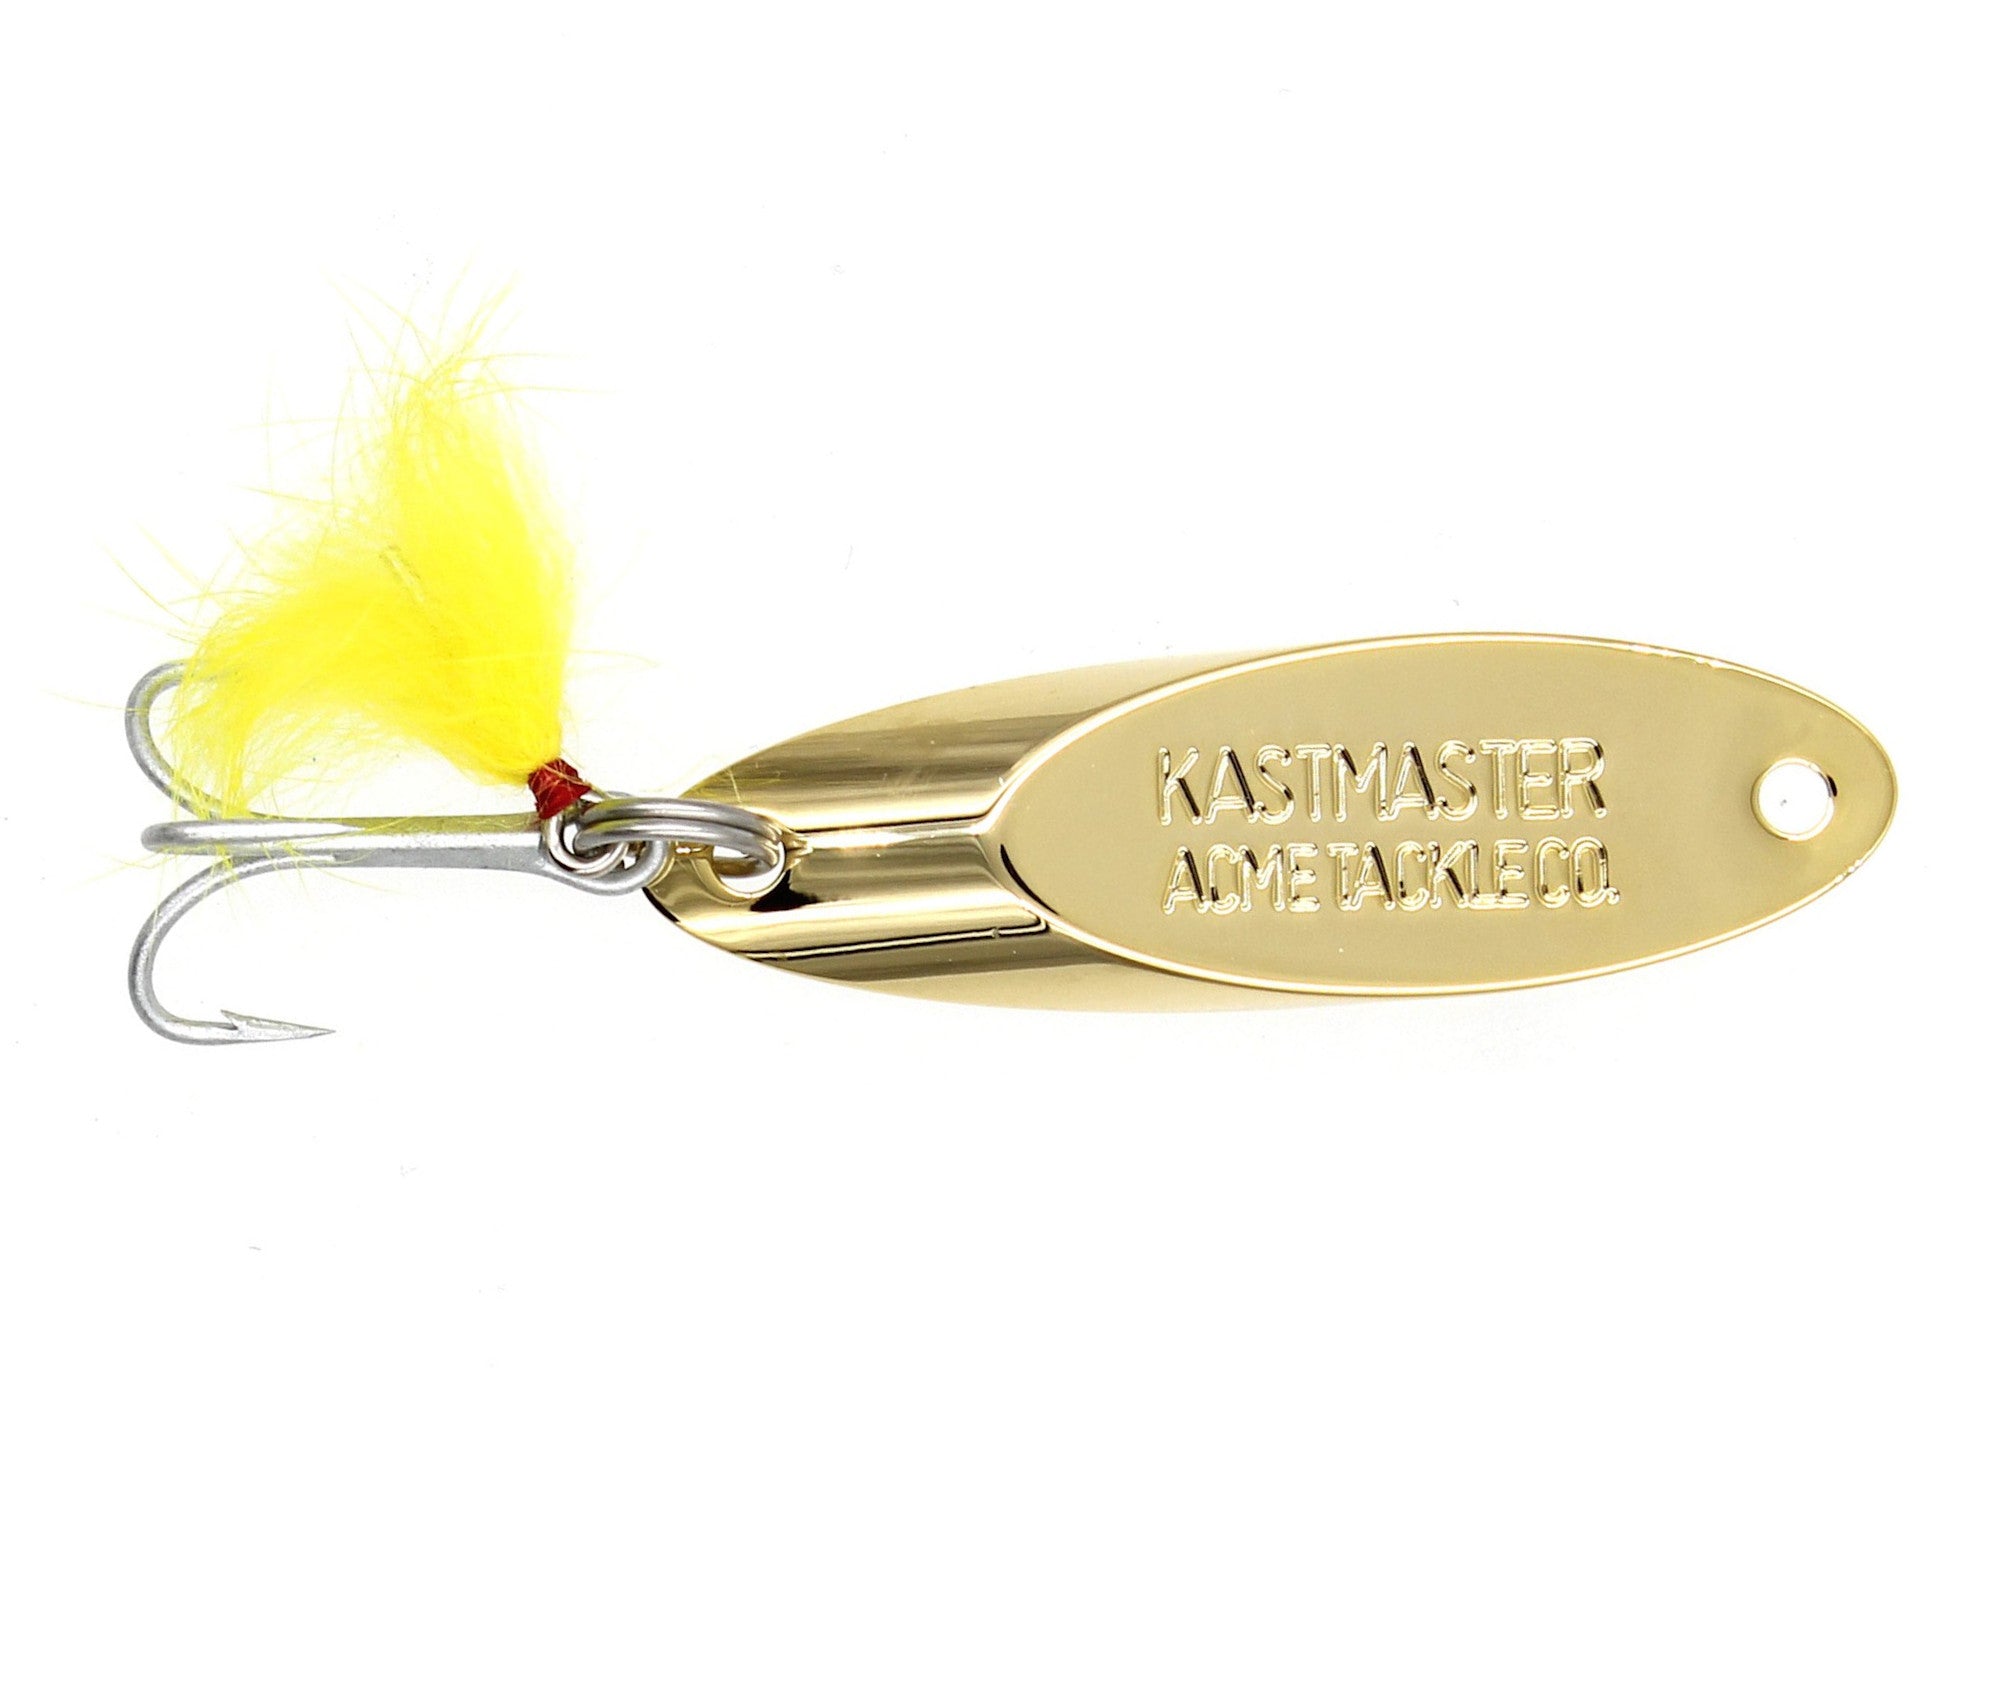 Acme Kastmaster Spoon 1/4 oz. Sunset - BRS Exclusive Color